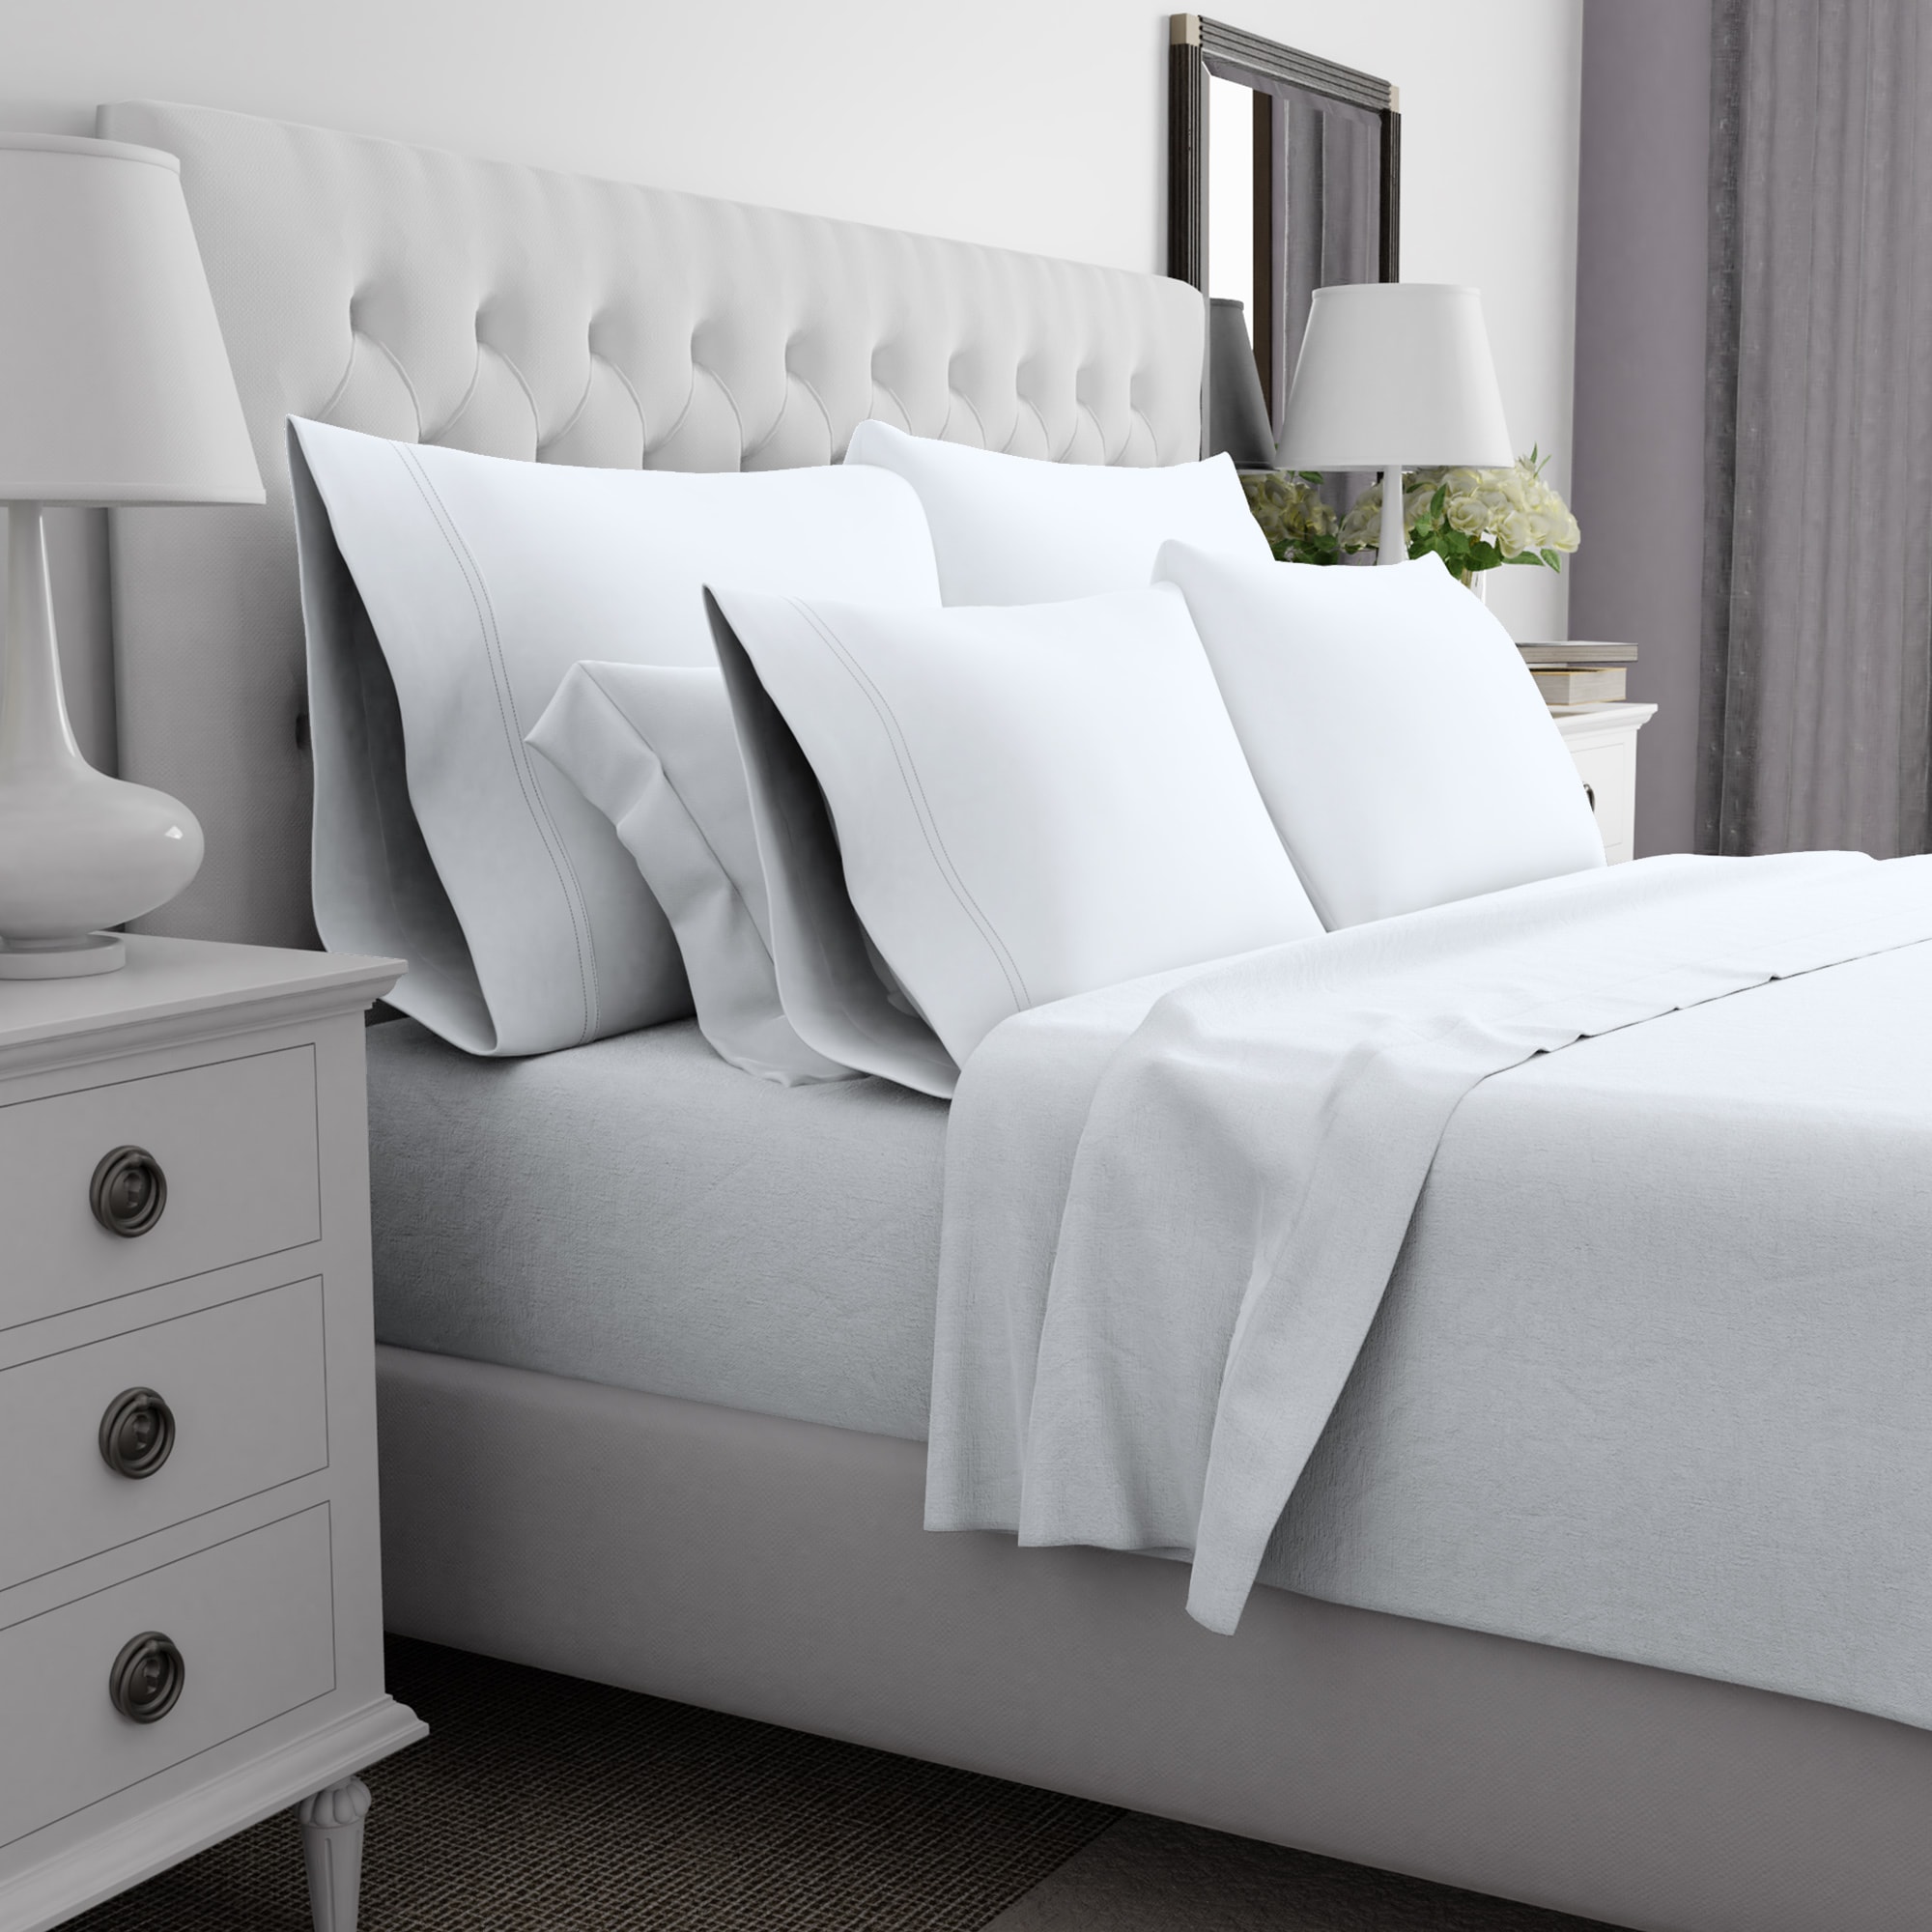 White Solid All Bedding Set Item Choose Size & Item 1000TC Pure Egyptian Cotton 